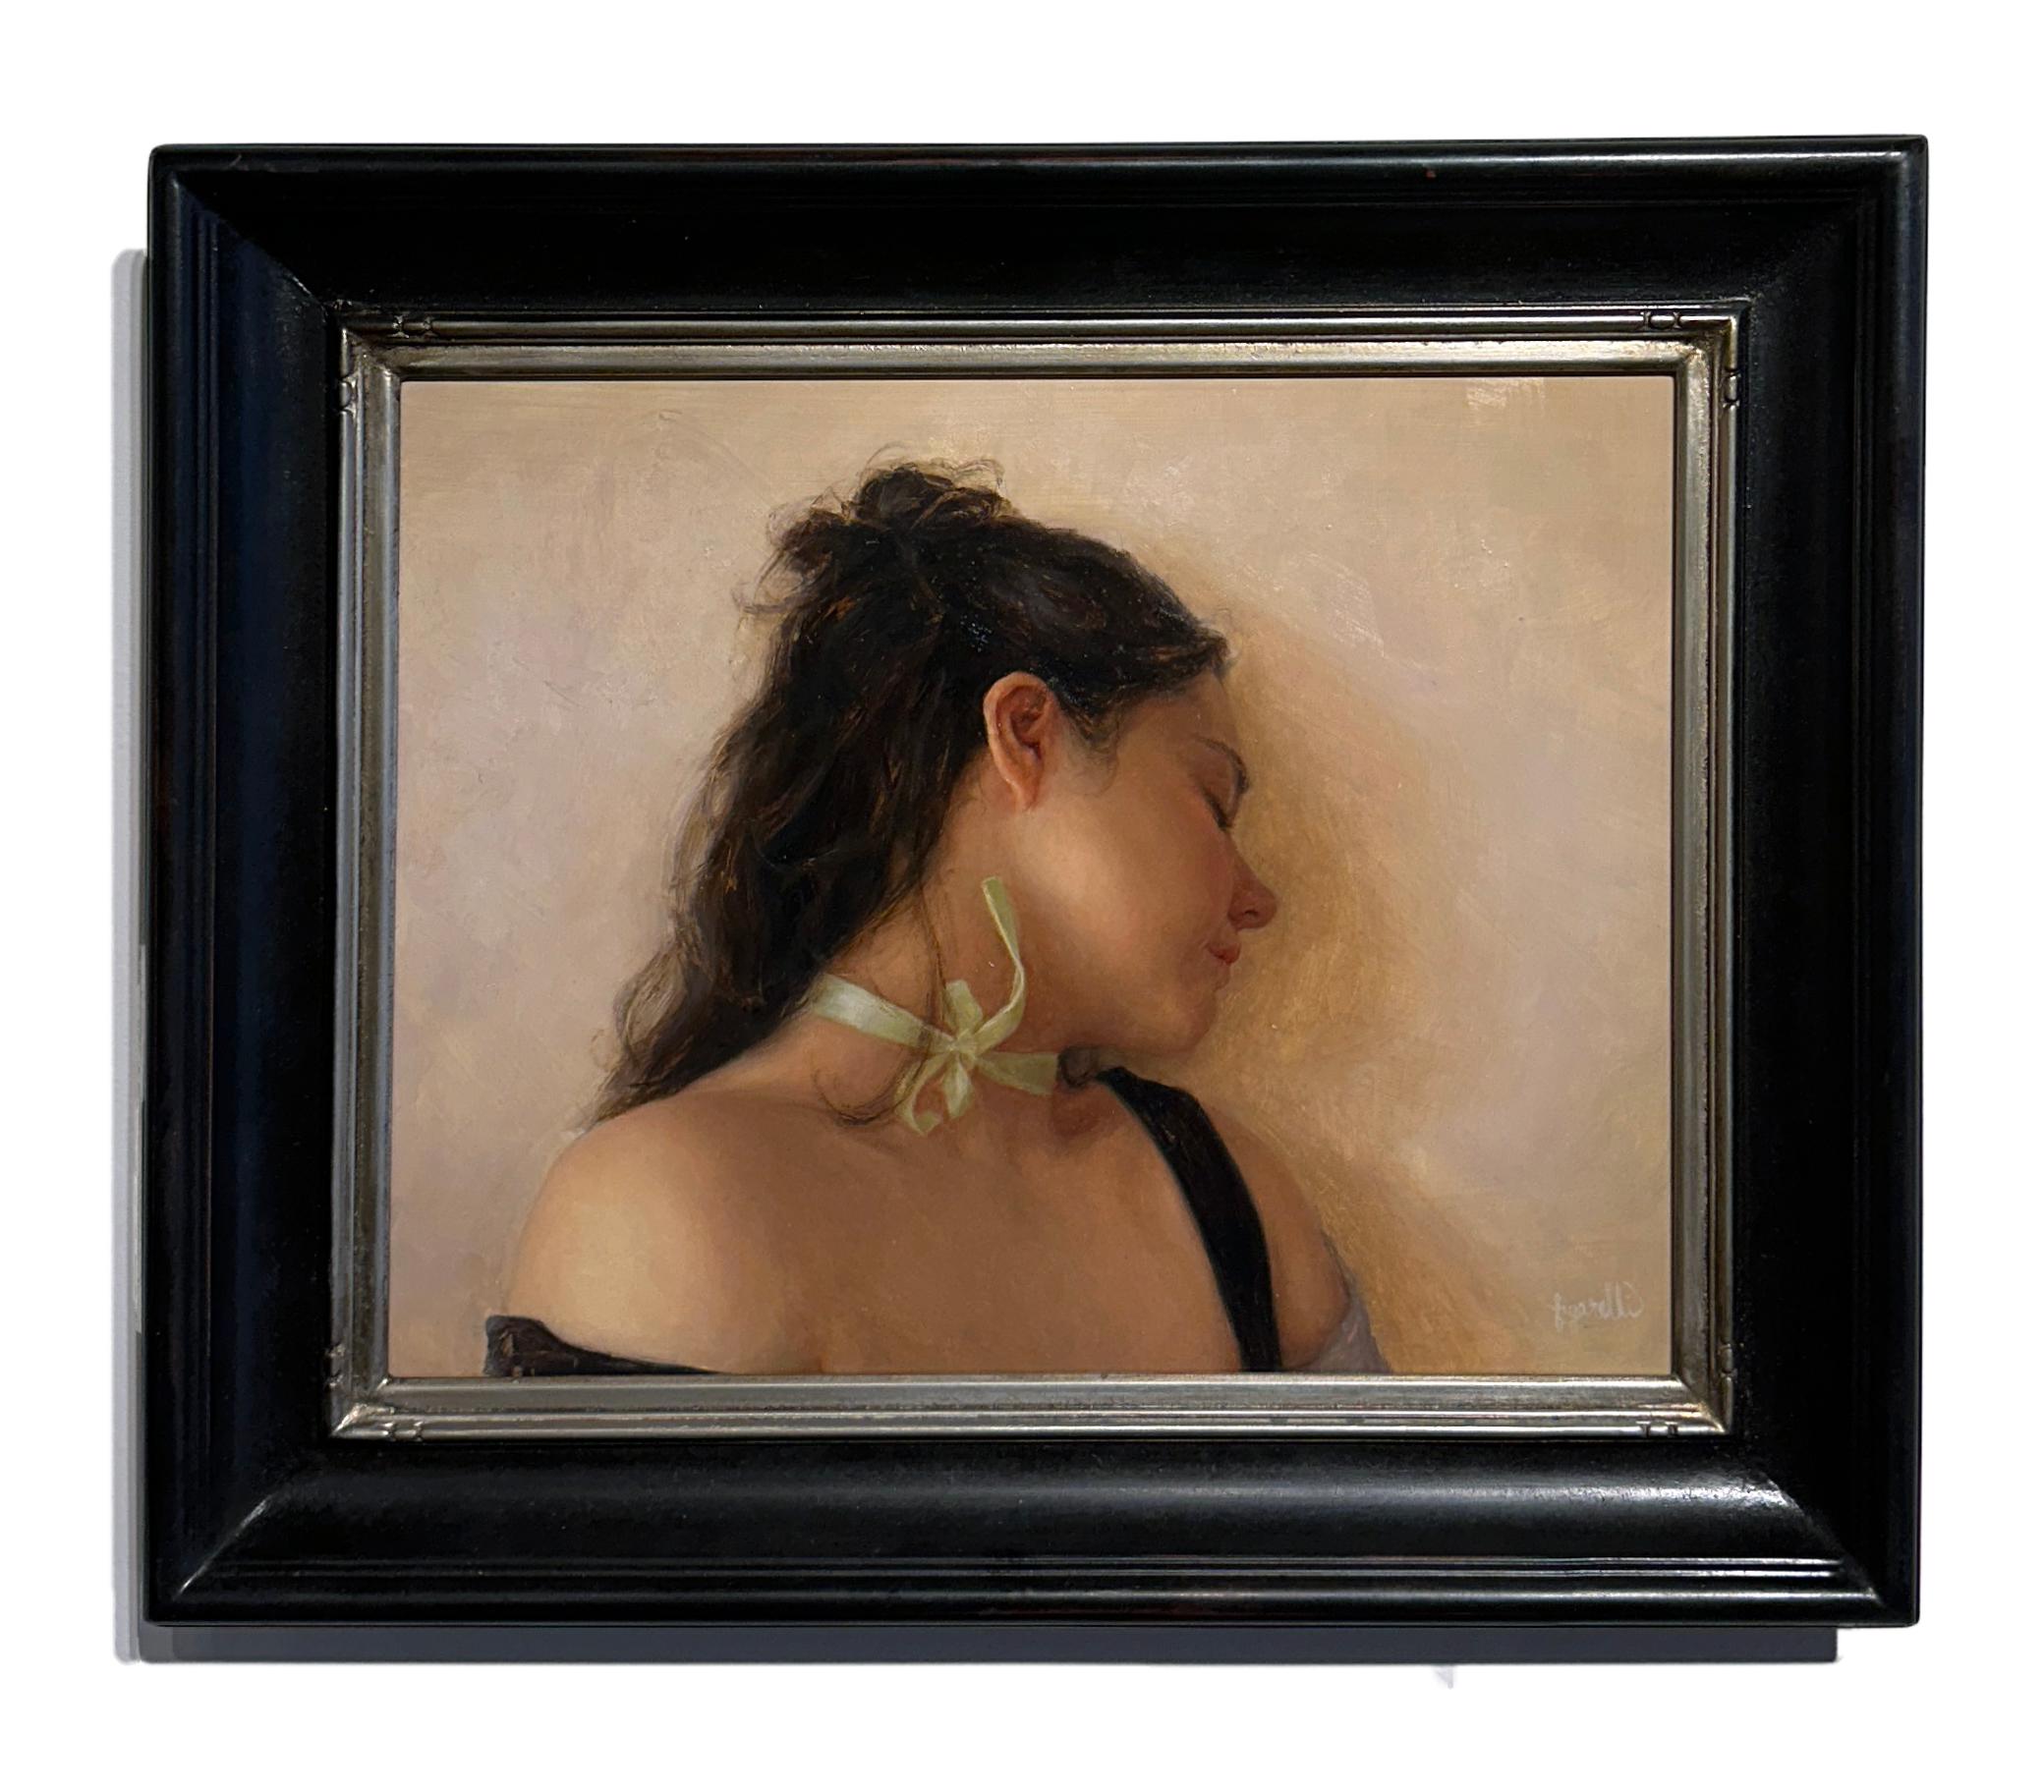 Tina Figarelli Portrait Painting – The Girl with the Green Ribbon - Contemplative weibliche Figur, Öl auf Tafel